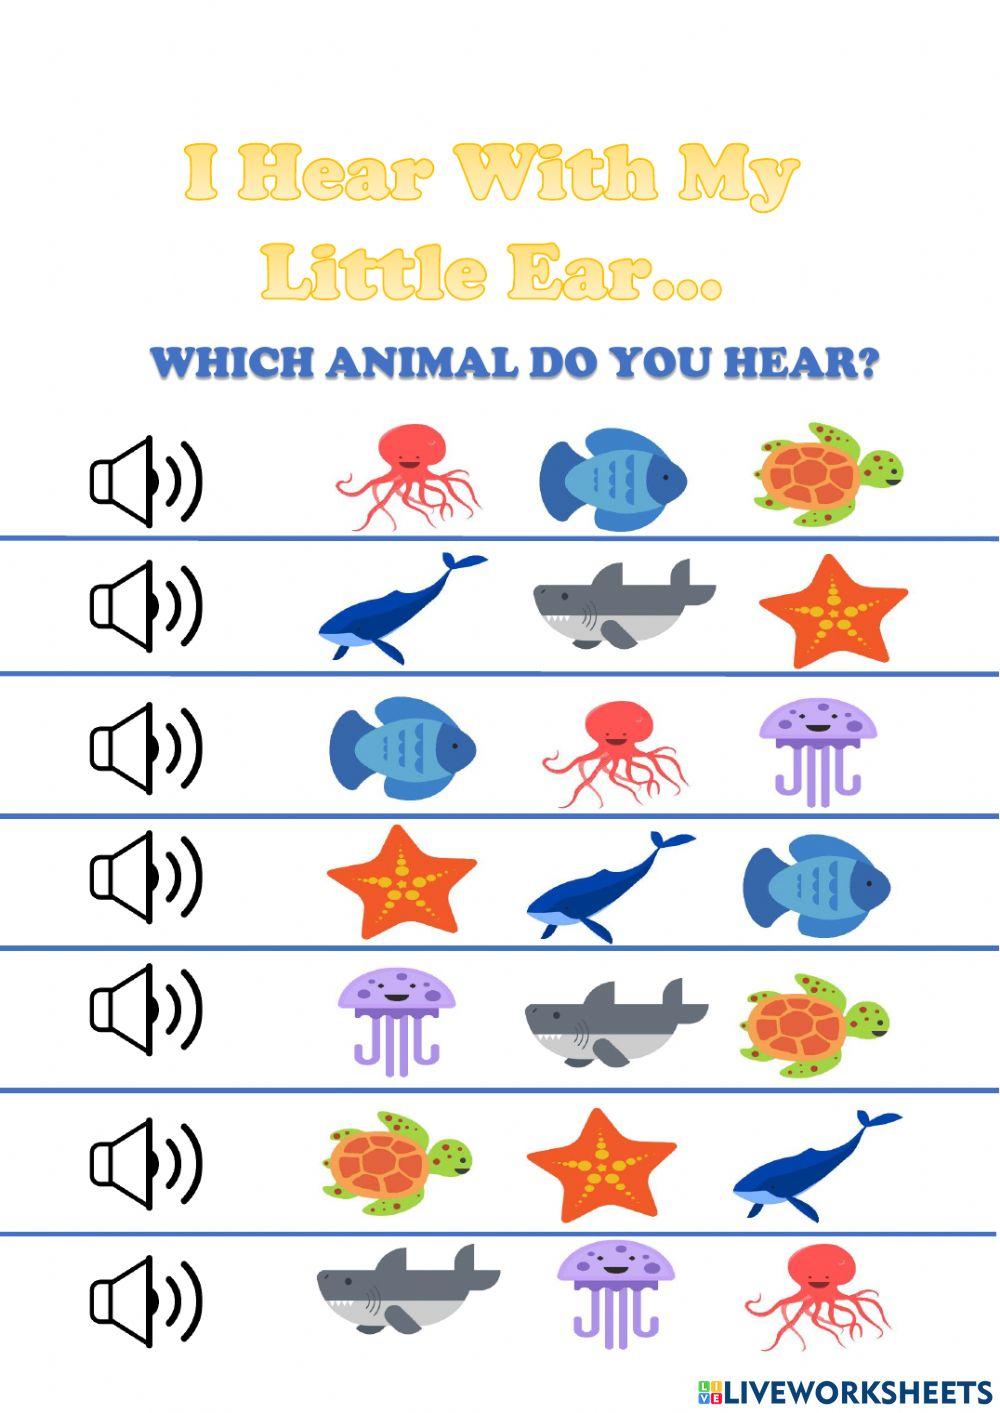 Which animal do you hear?